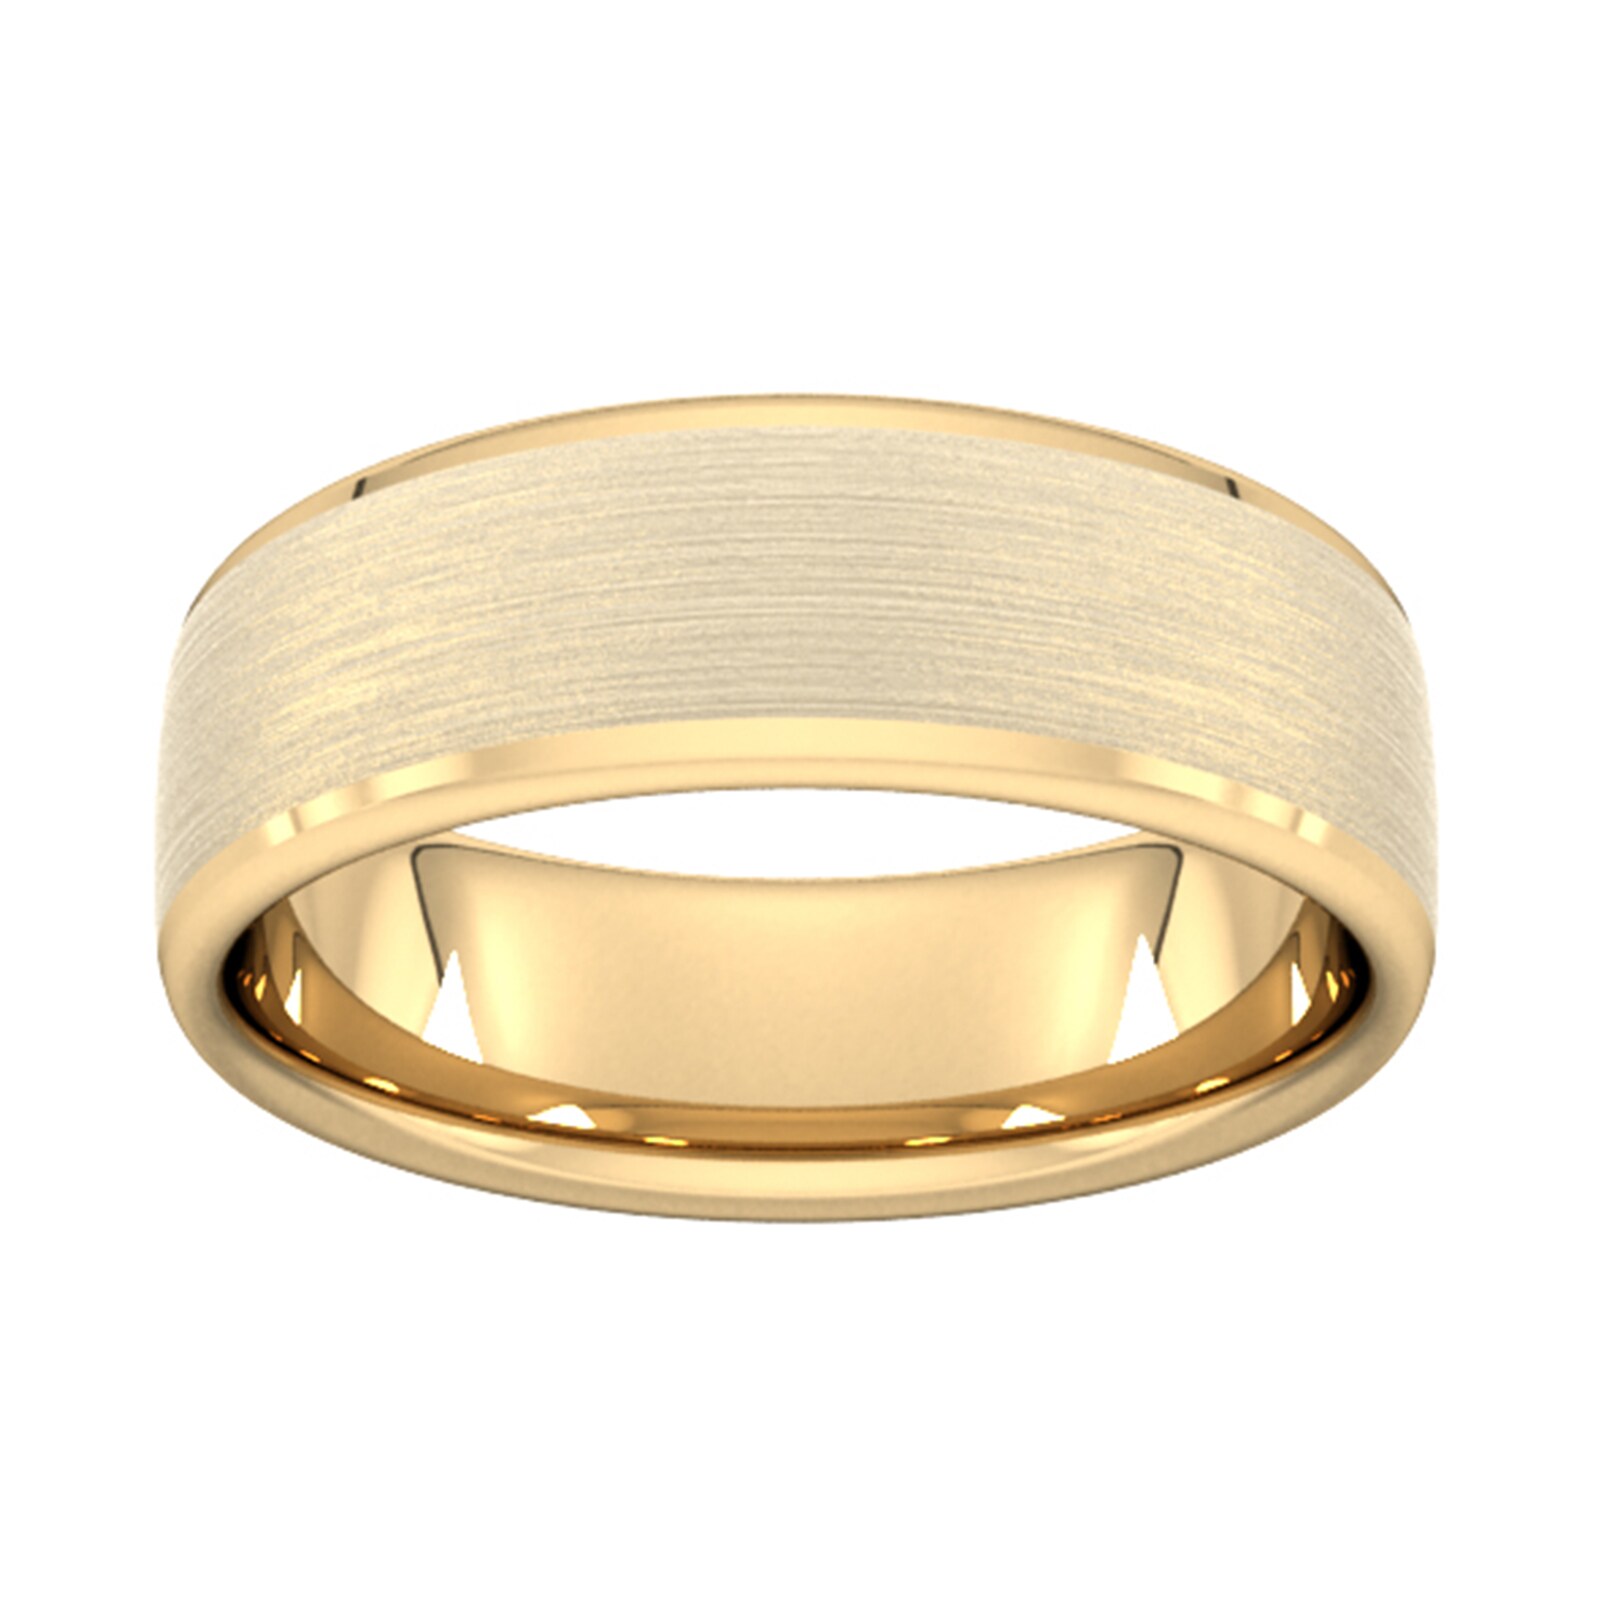 7mm D Shape Heavy Polished Chamfered Edges With Matt Centre Wedding Ring In 9 Carat Yellow Gold - Ring Size X